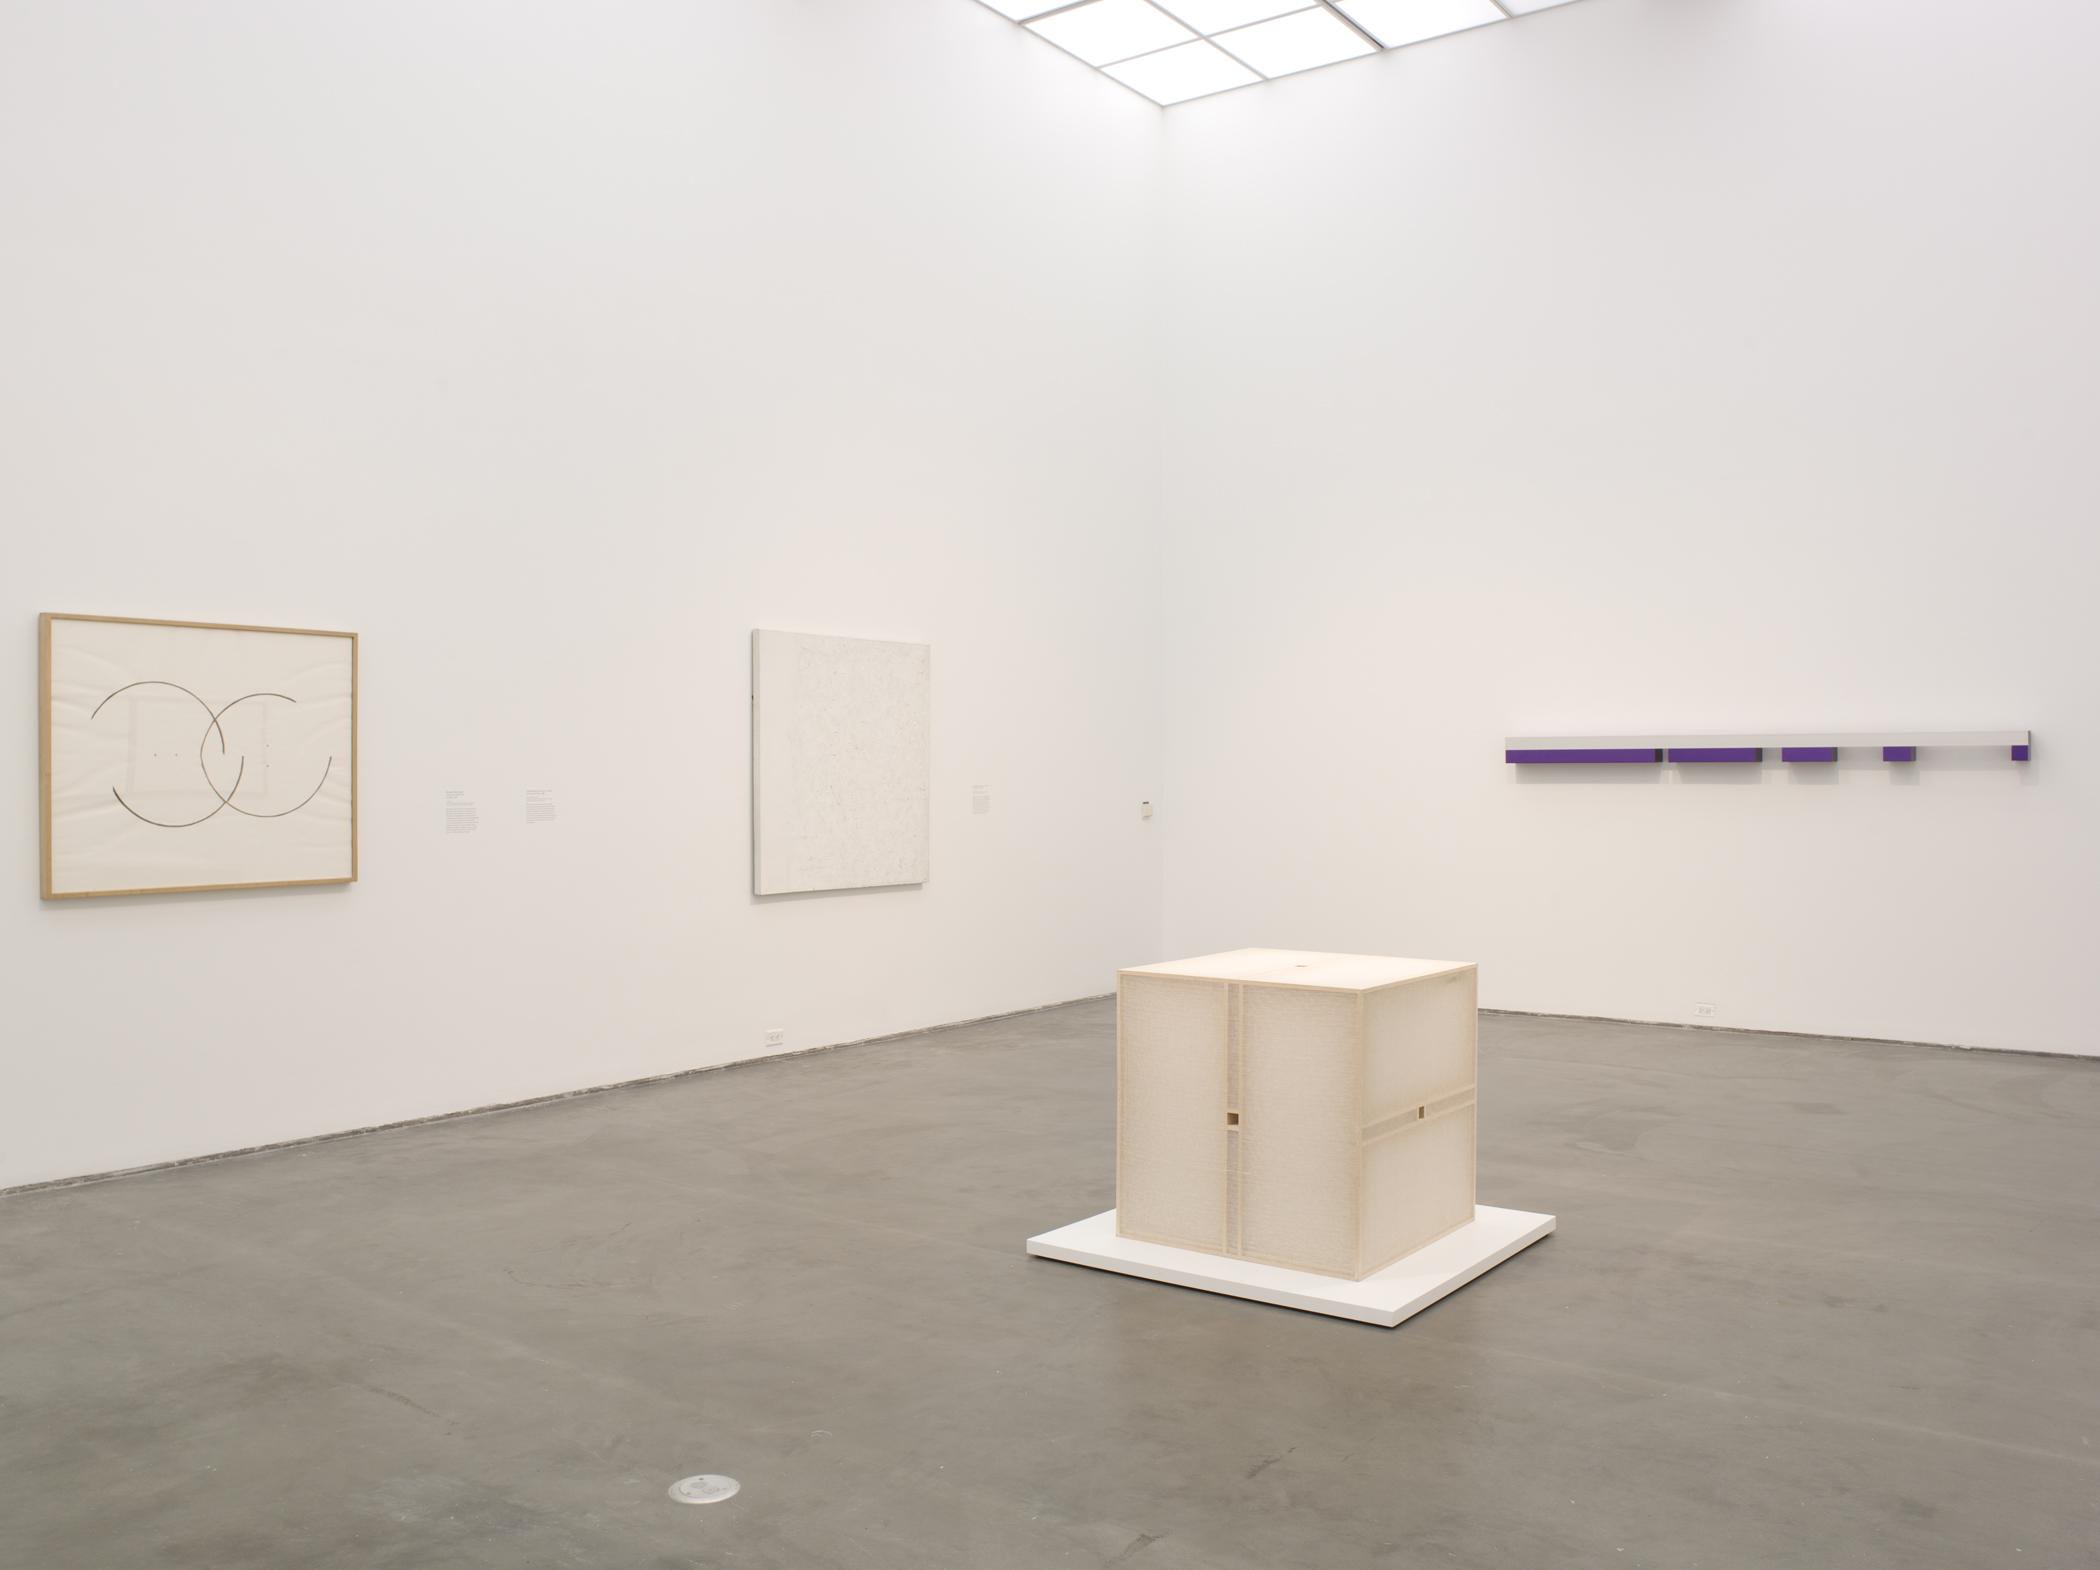 Installation view of a cube-shaped sculpture on a white platform, two paintings, and a wall sculpture